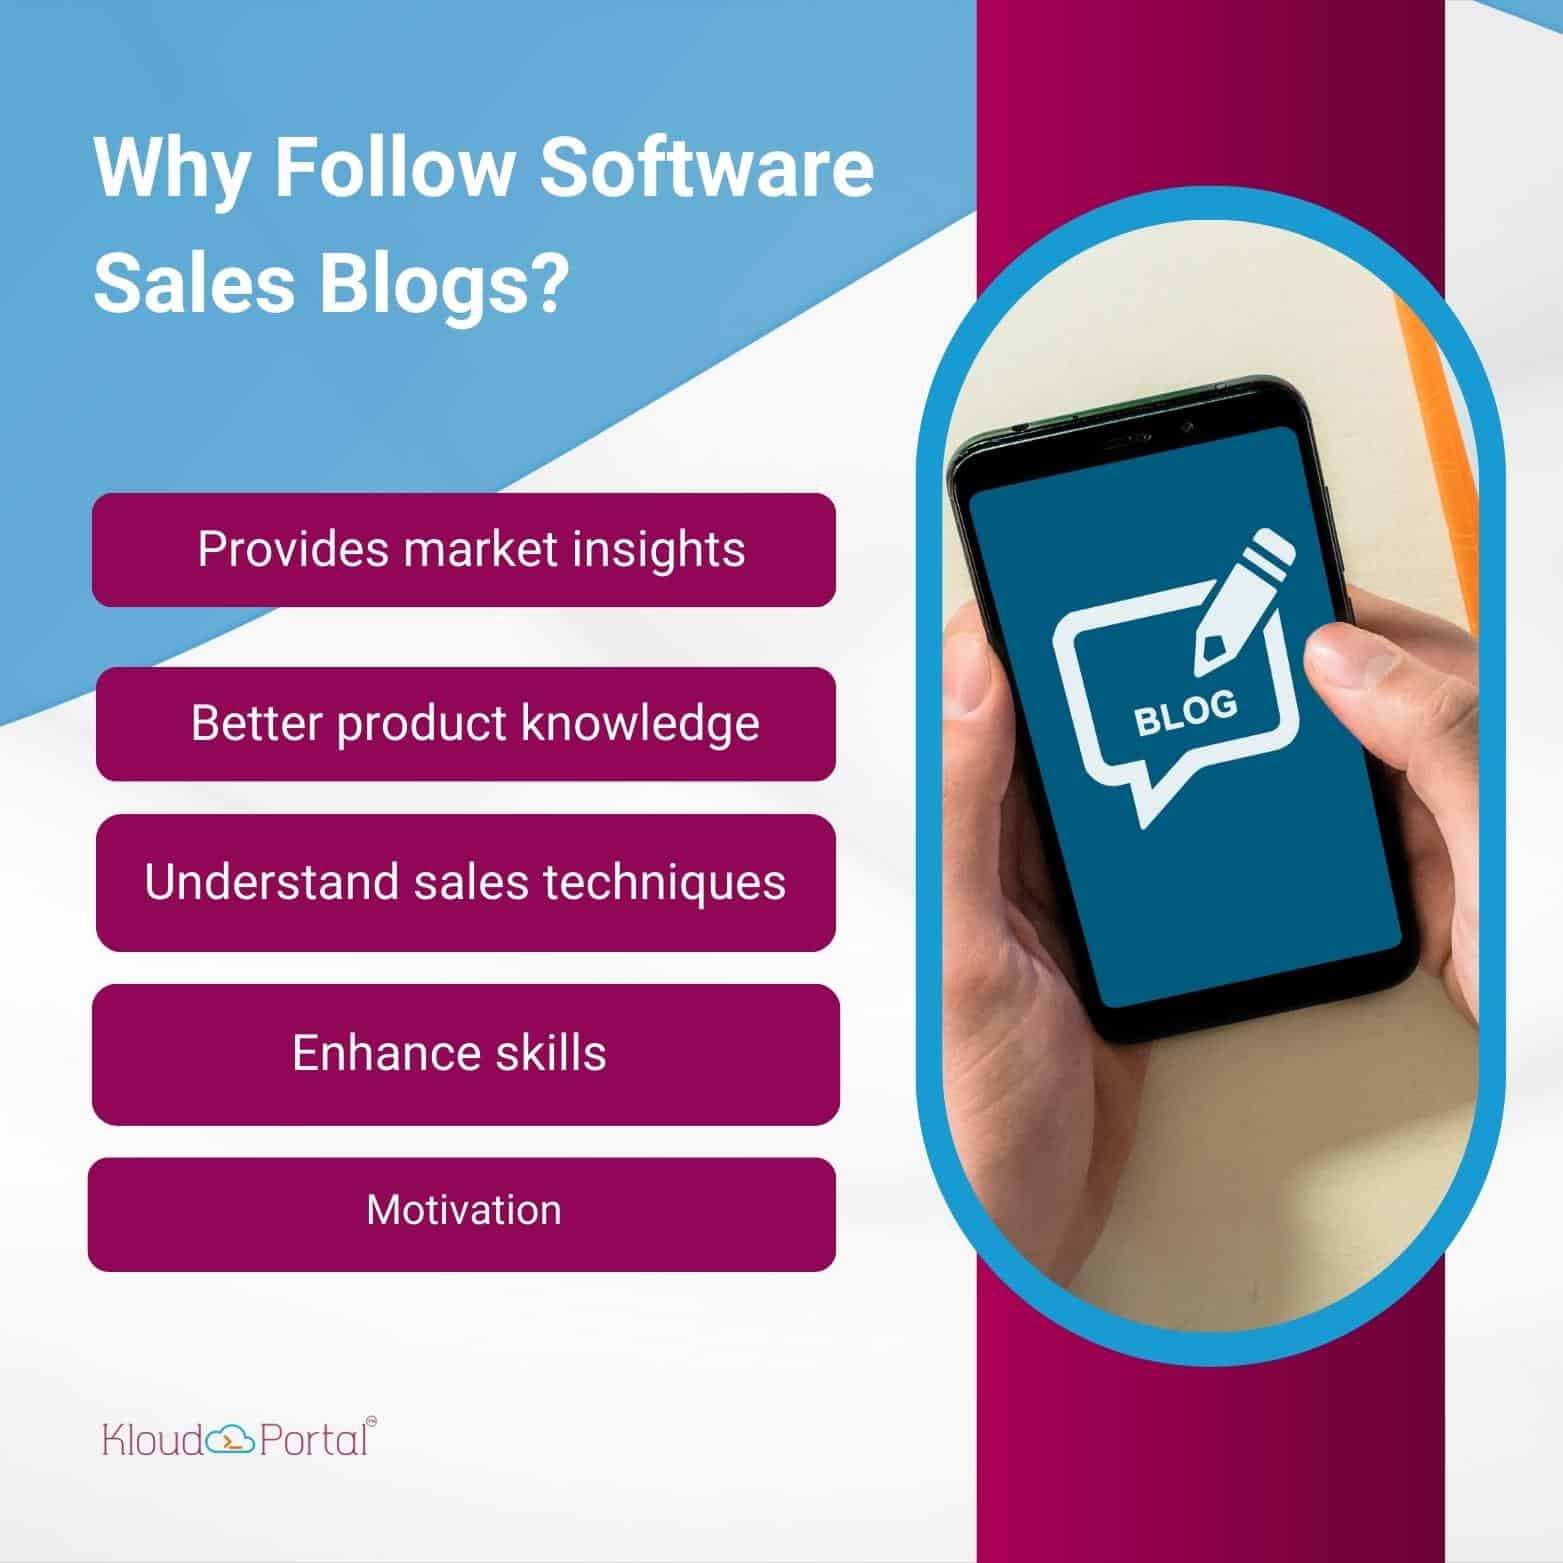 Why Follow Software Sales Blogs